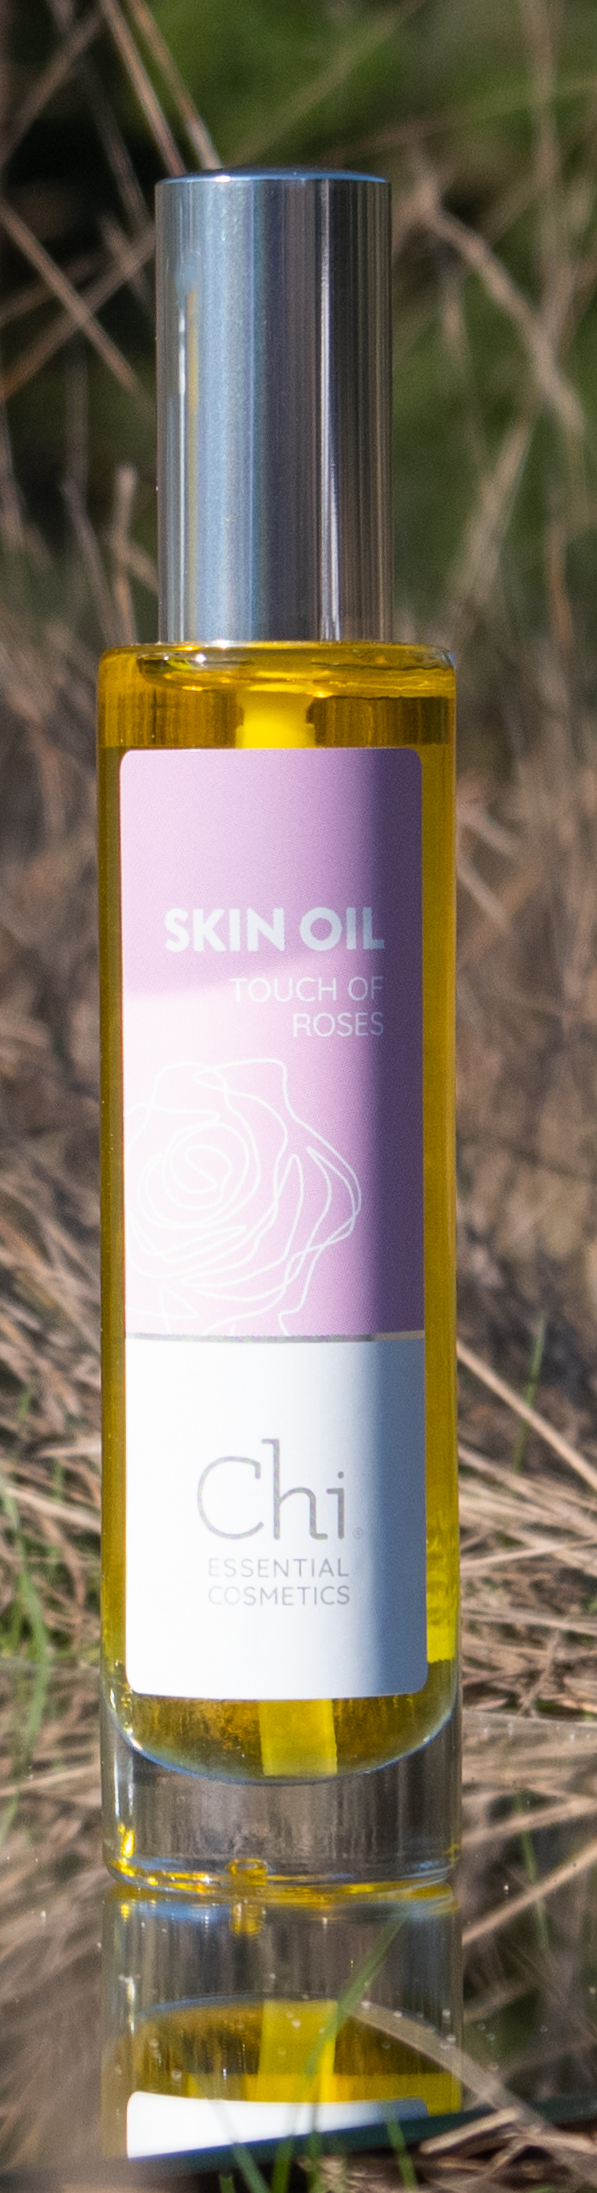 A Touch of Roses Skin Oil Heide